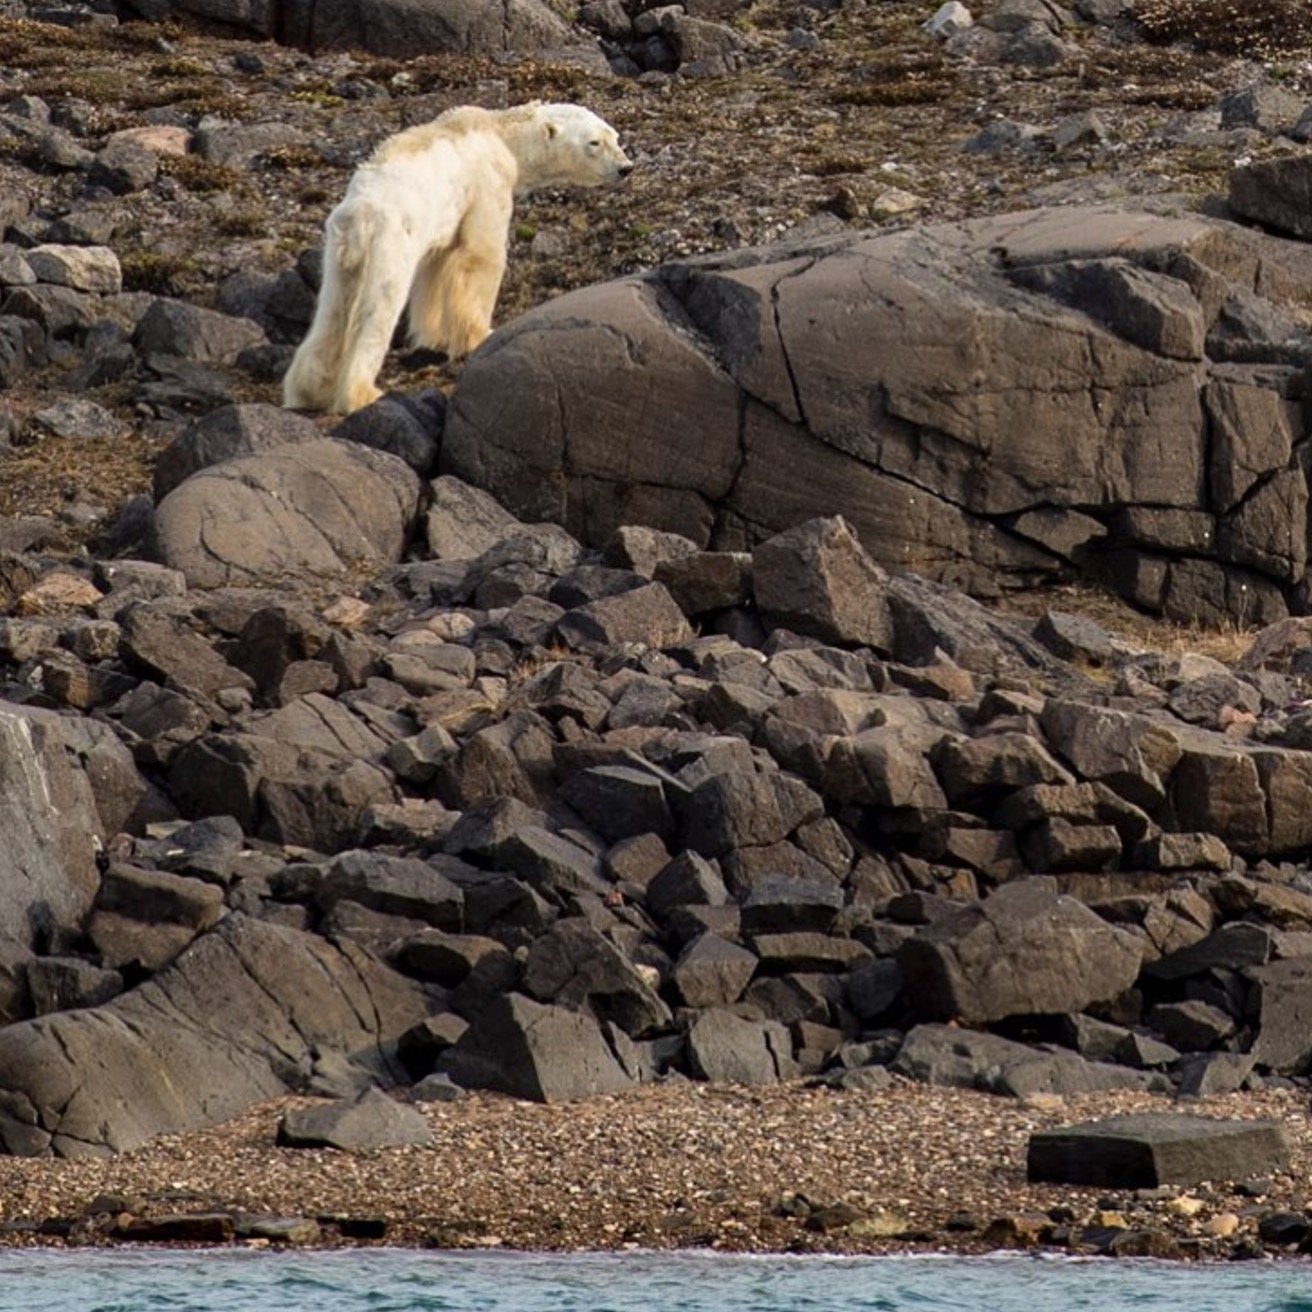 “He was once a huge male polar bear and now he is a bag of bones” Paul Nicklen